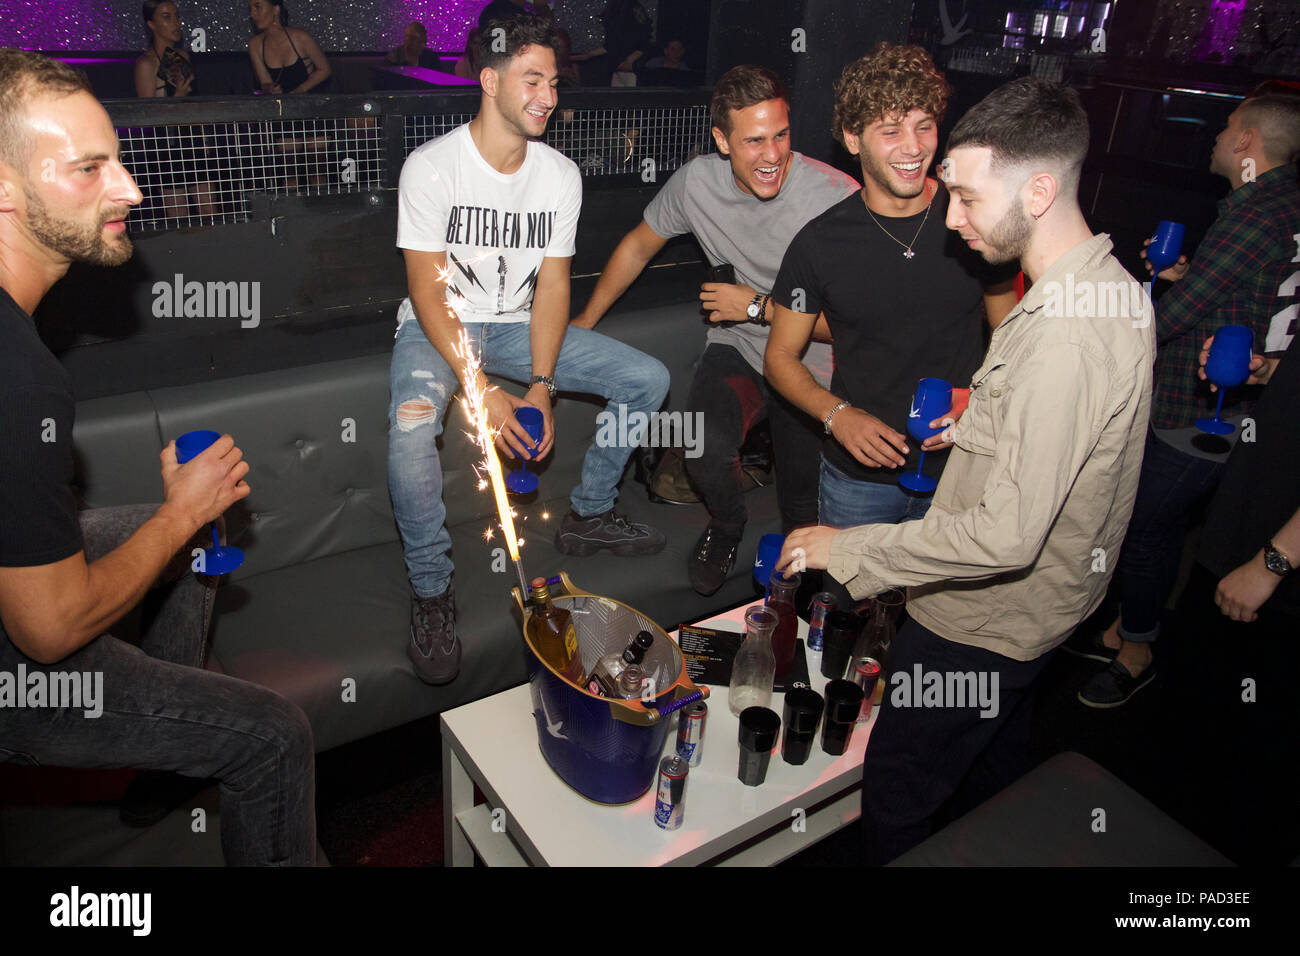 Watford, UK. 21st July, 2018. Love Island star Eyal Booker enjoys a night out with friends as he parties in the VIP section at Hydeout 2.0 nightclub in Watford, UK. He wasn't short of female attention with hoardes of girls queing up to chat to and get a photo with him - as well as flirt. One girl in particular who hung out with Eyal and his friends was a dead ringer for chart topper Rihanna. The boys bought several bottles of spirits sharing drinks around as they partied. Eyal said he wants to keep his partying to a minimum as there are other things he would like to focus on since his Love Isl Stock Photo